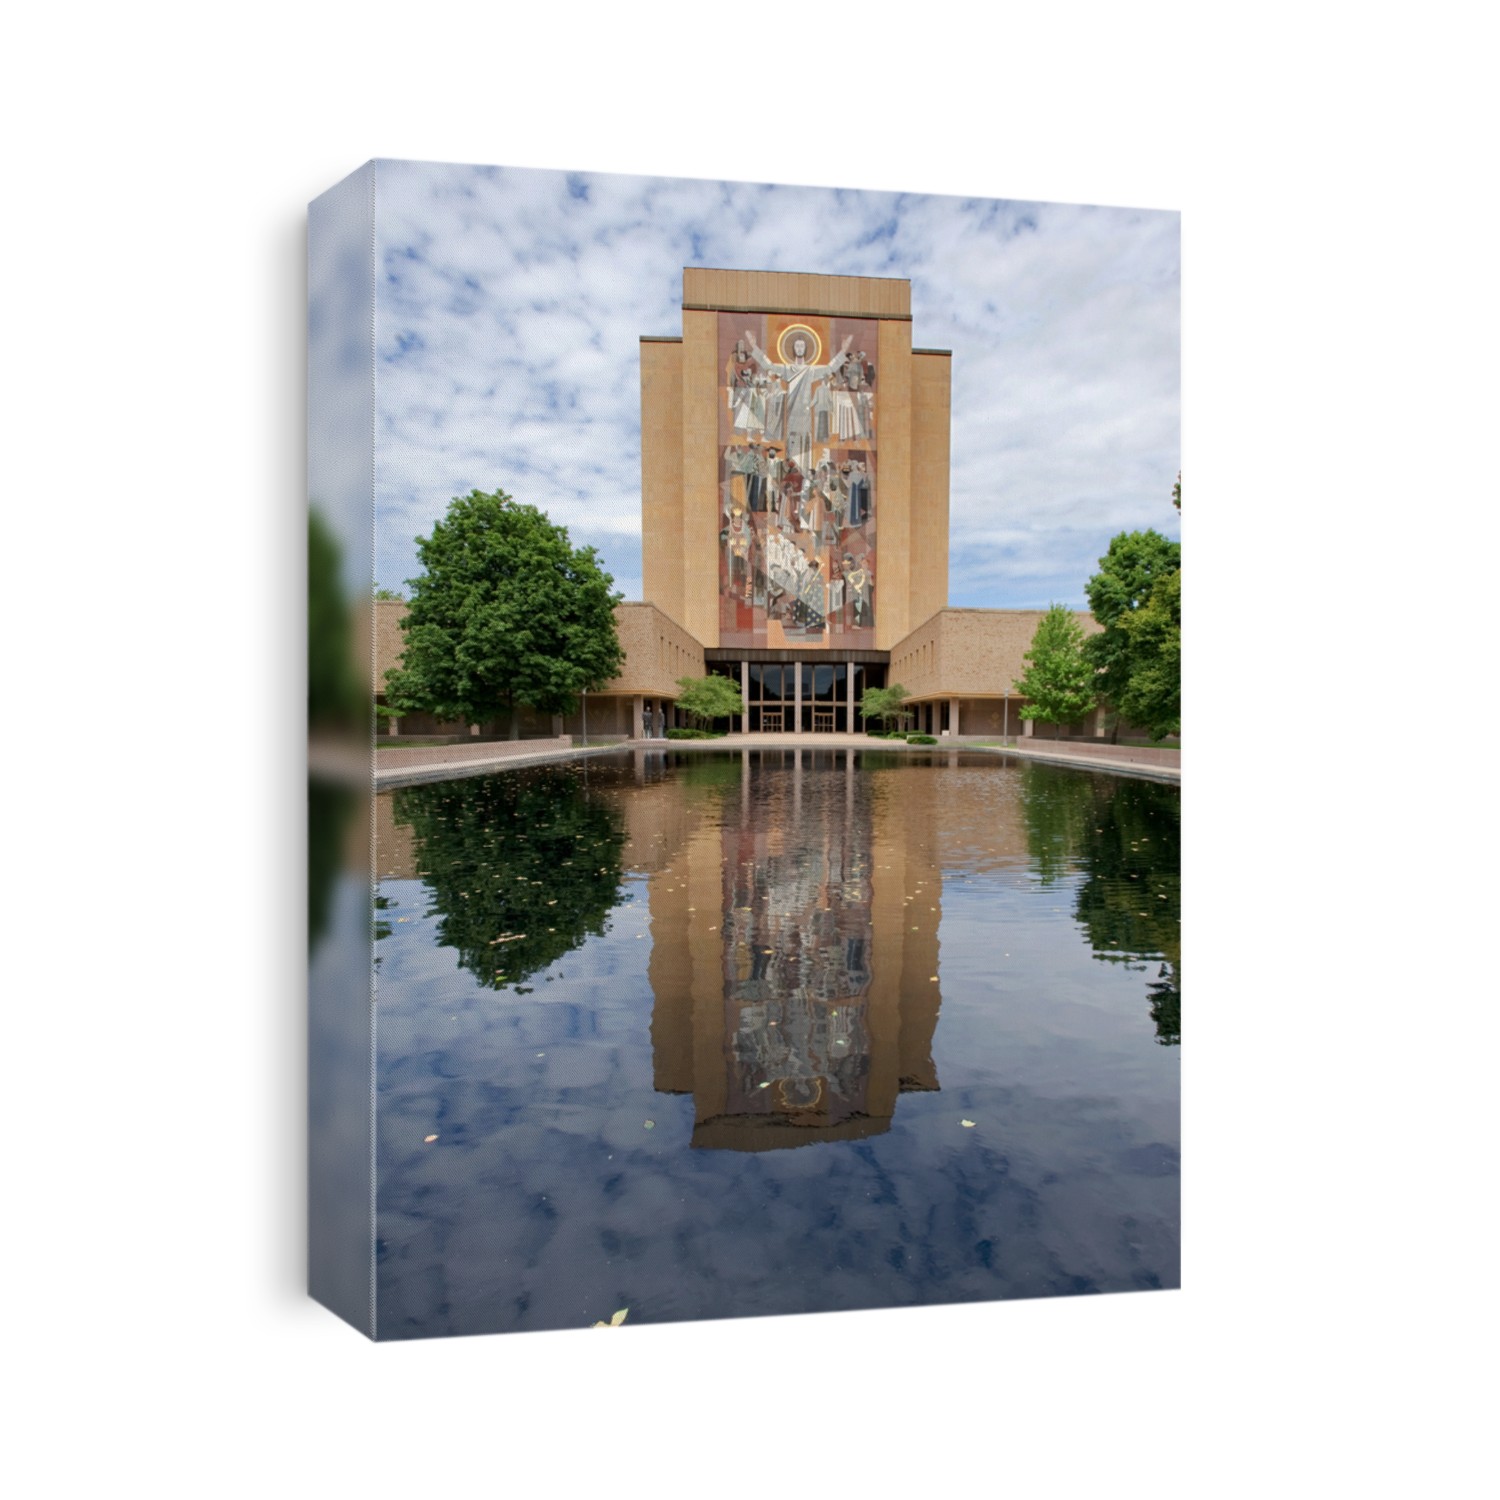 Hesburgh Library of University of Notre Dame, Indiana